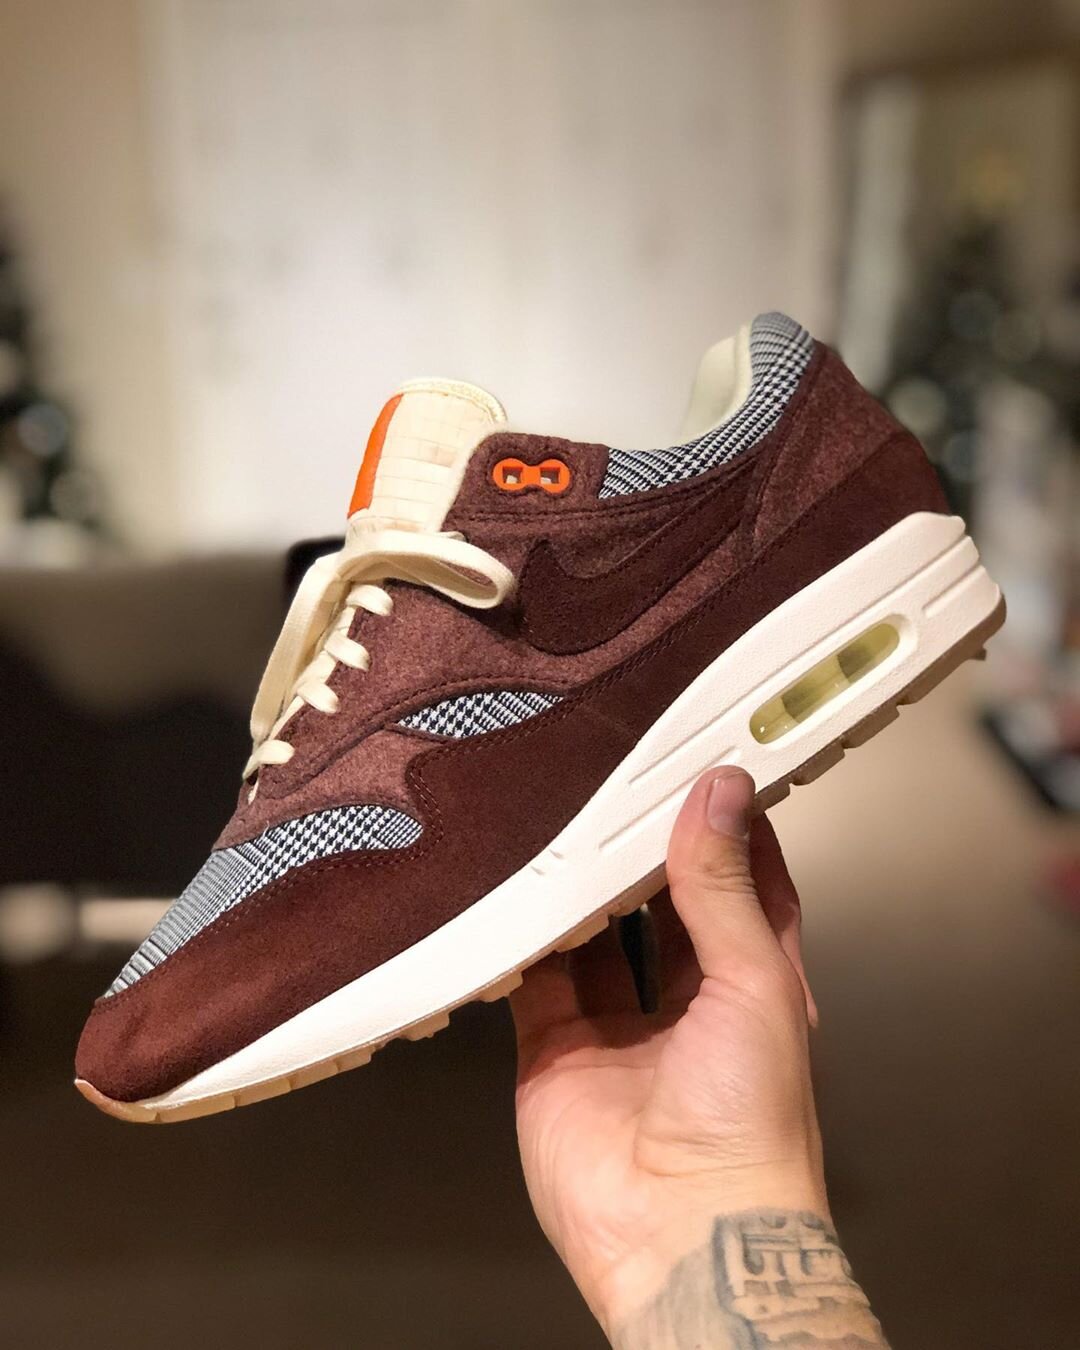 Be confused Tochi tree Pessimistic On Sale: Nike Air Max 1 "Bronze Eclipse" — Sneaker Shouts